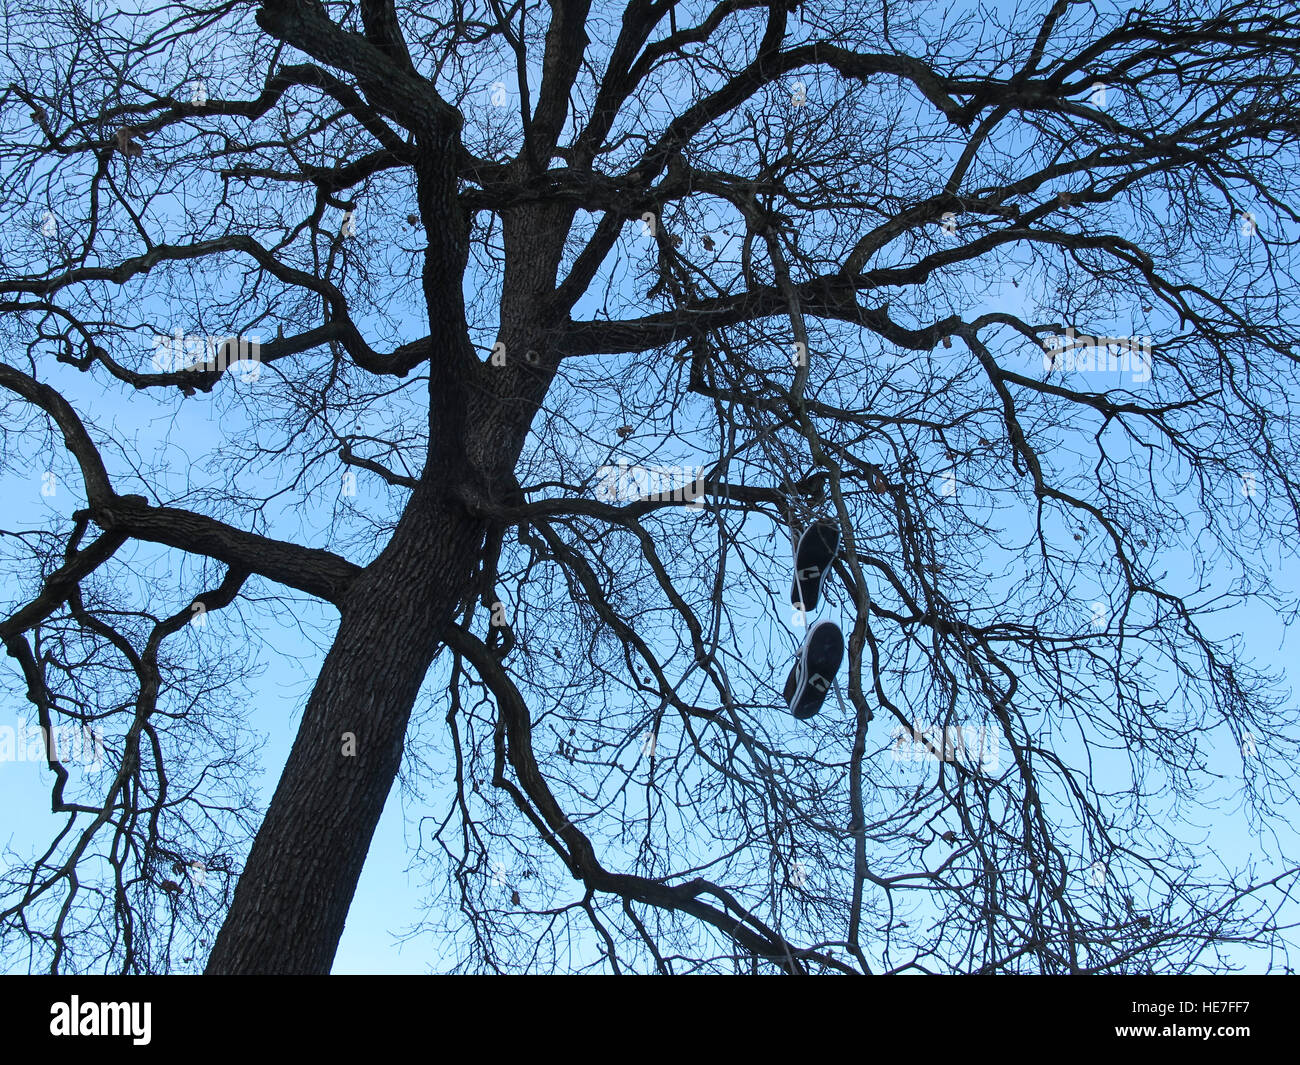 A pair of shoes in a tree. Berlin, Germany. Stock Photo